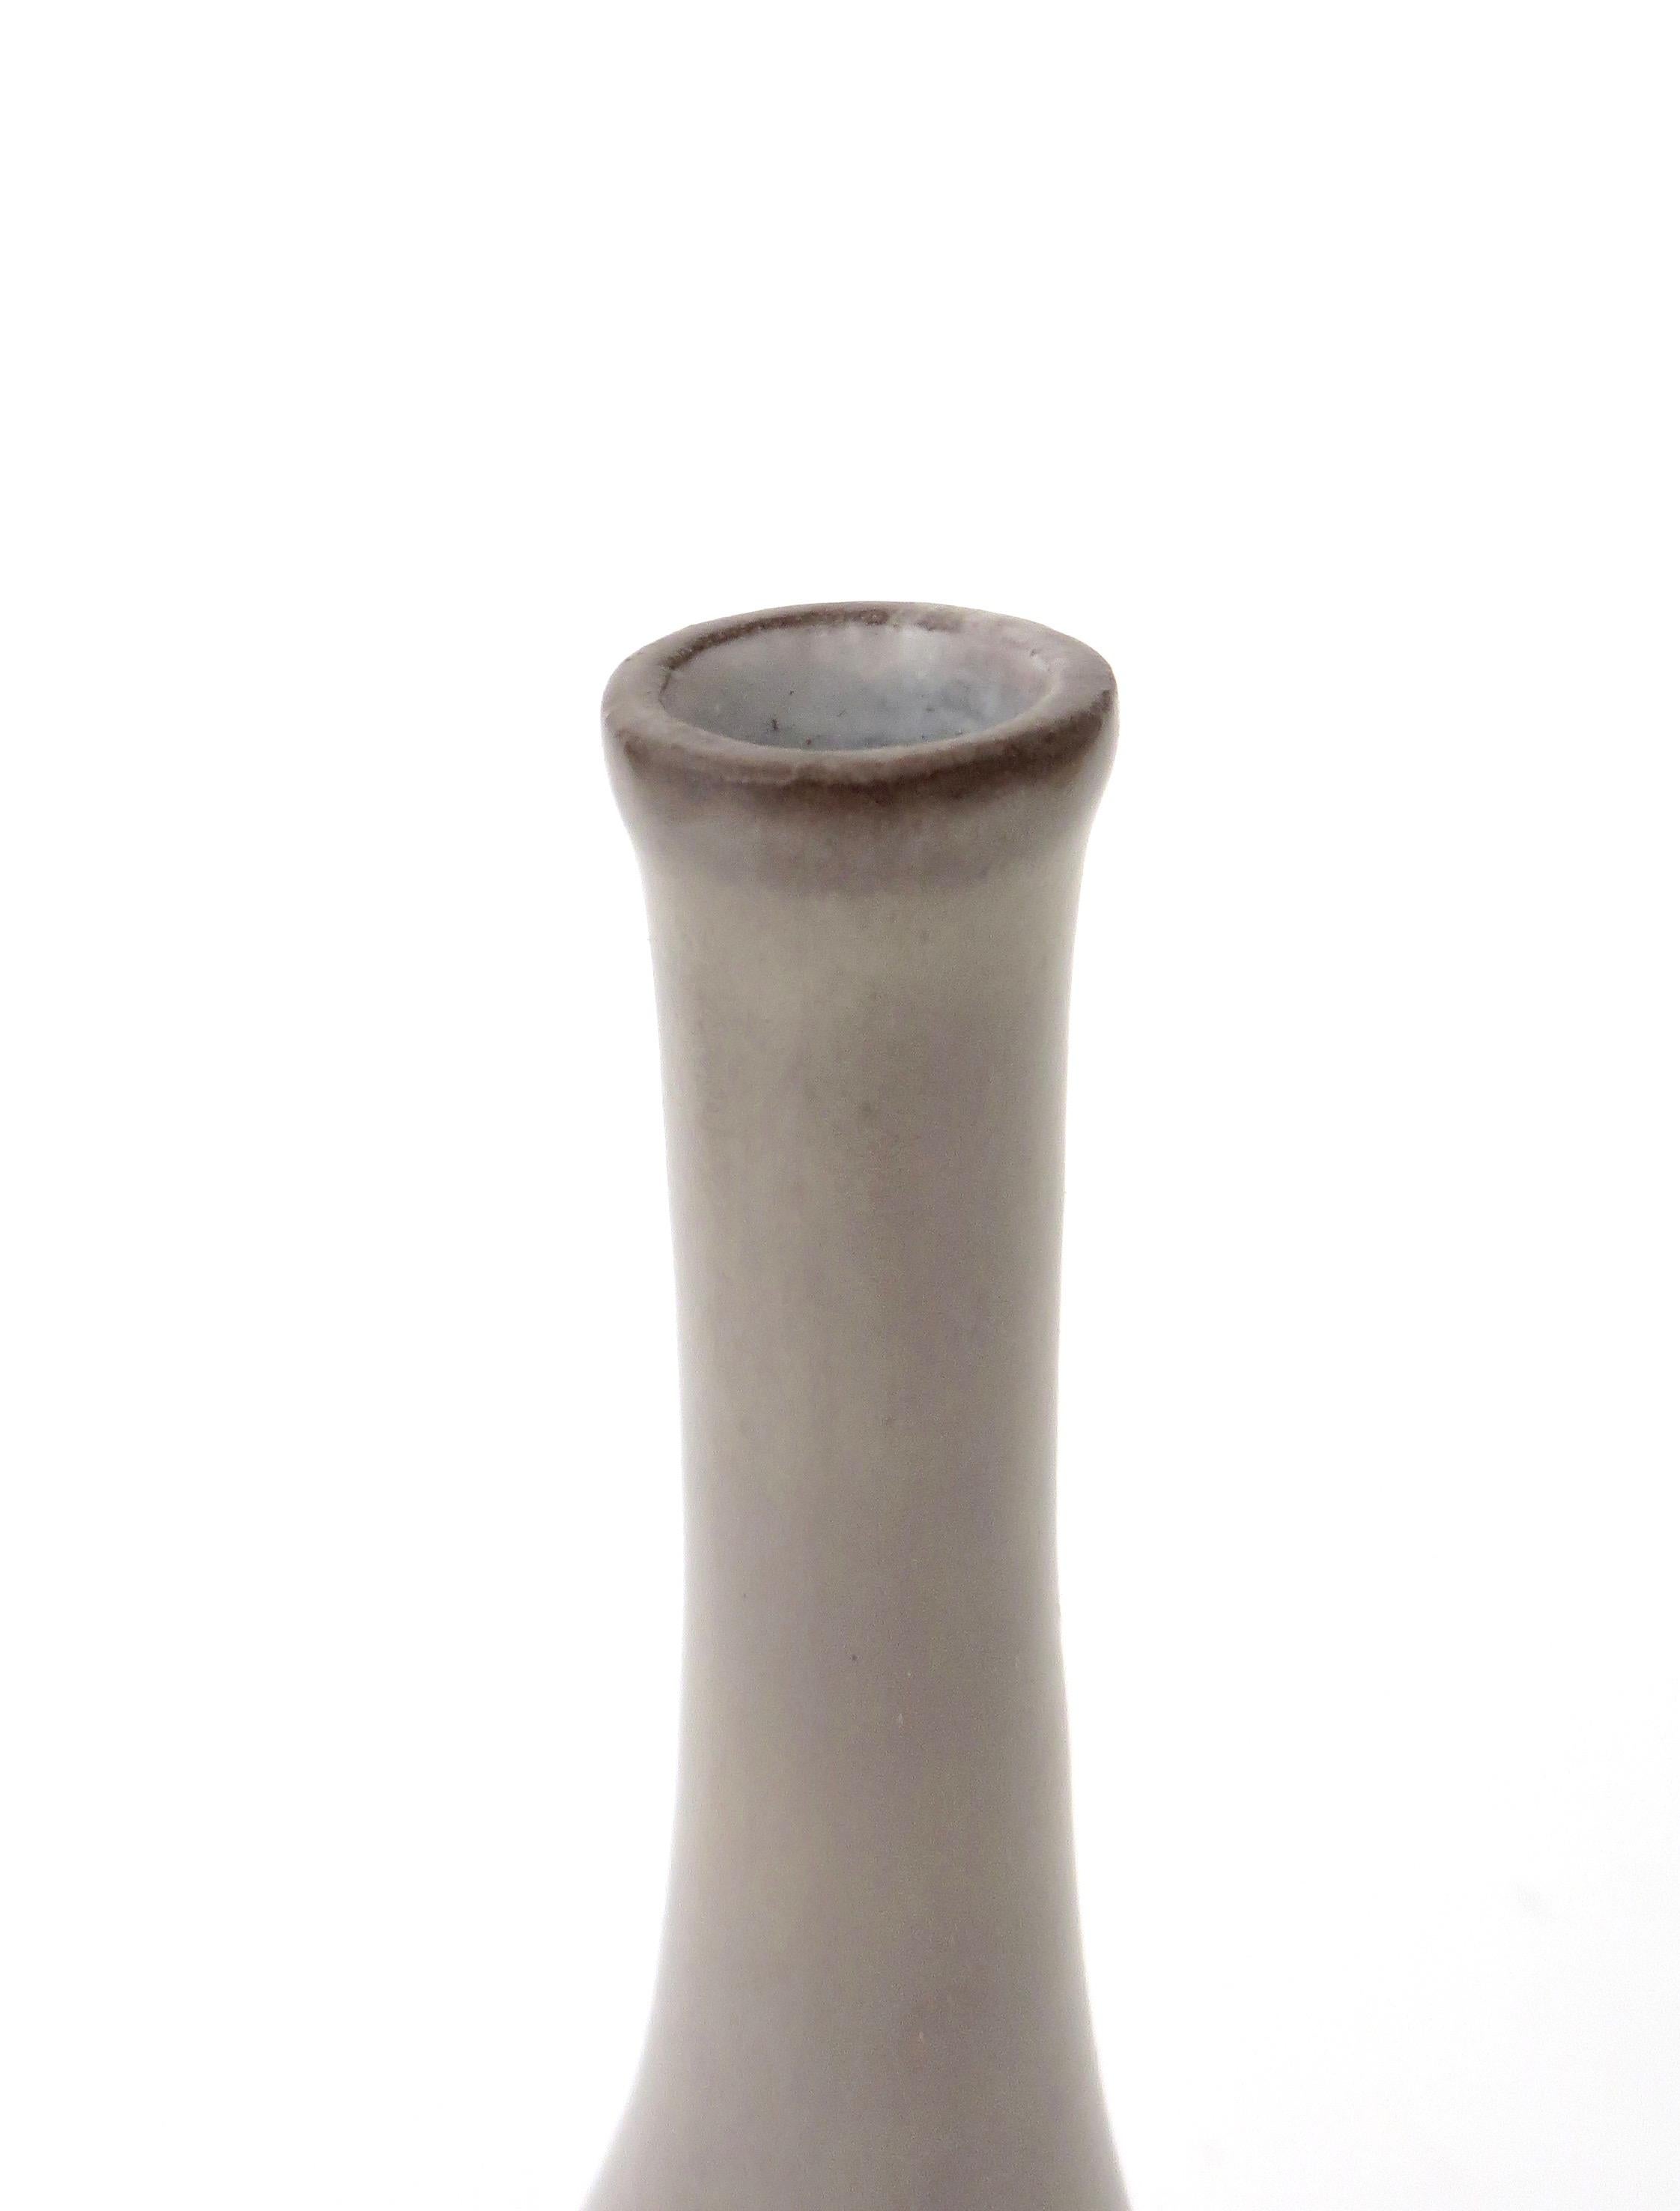 Jacques and Dani Ruelland French Ceramic Bottle In Pale Gray to Lavender Glaze 2